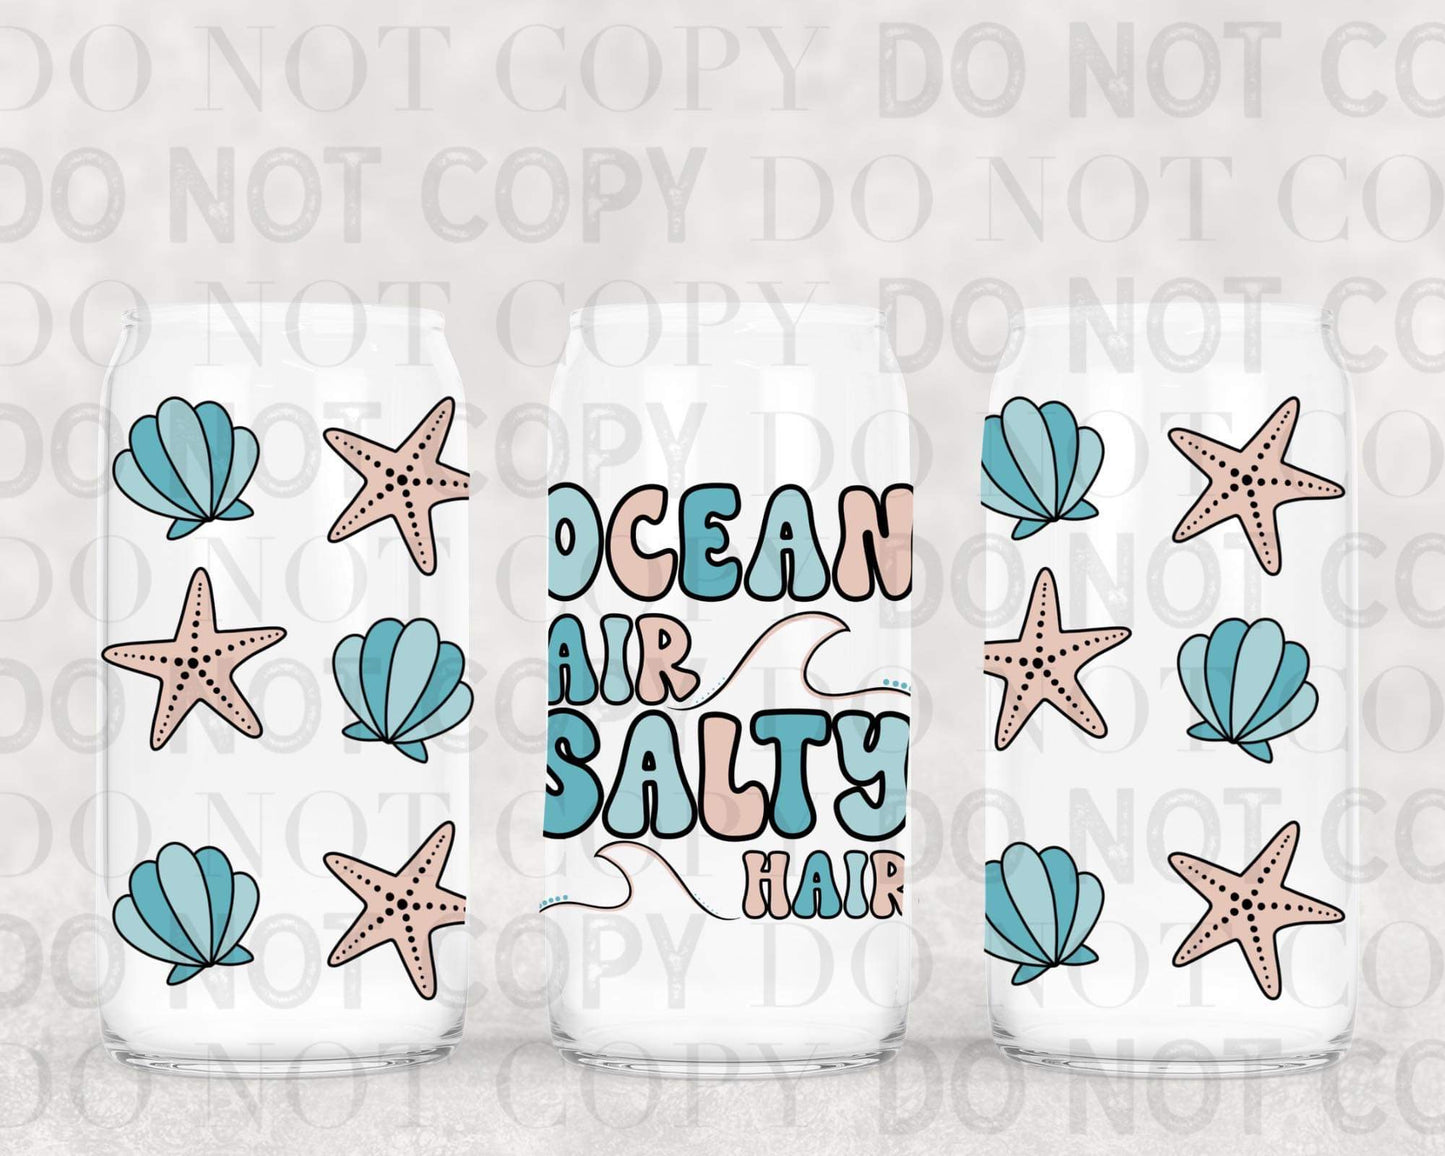 Ocean Air Salty Hair Tumbler Wrap sized for 16 oz frosted cup from mother tumbler  Cerra's Shop Creates   